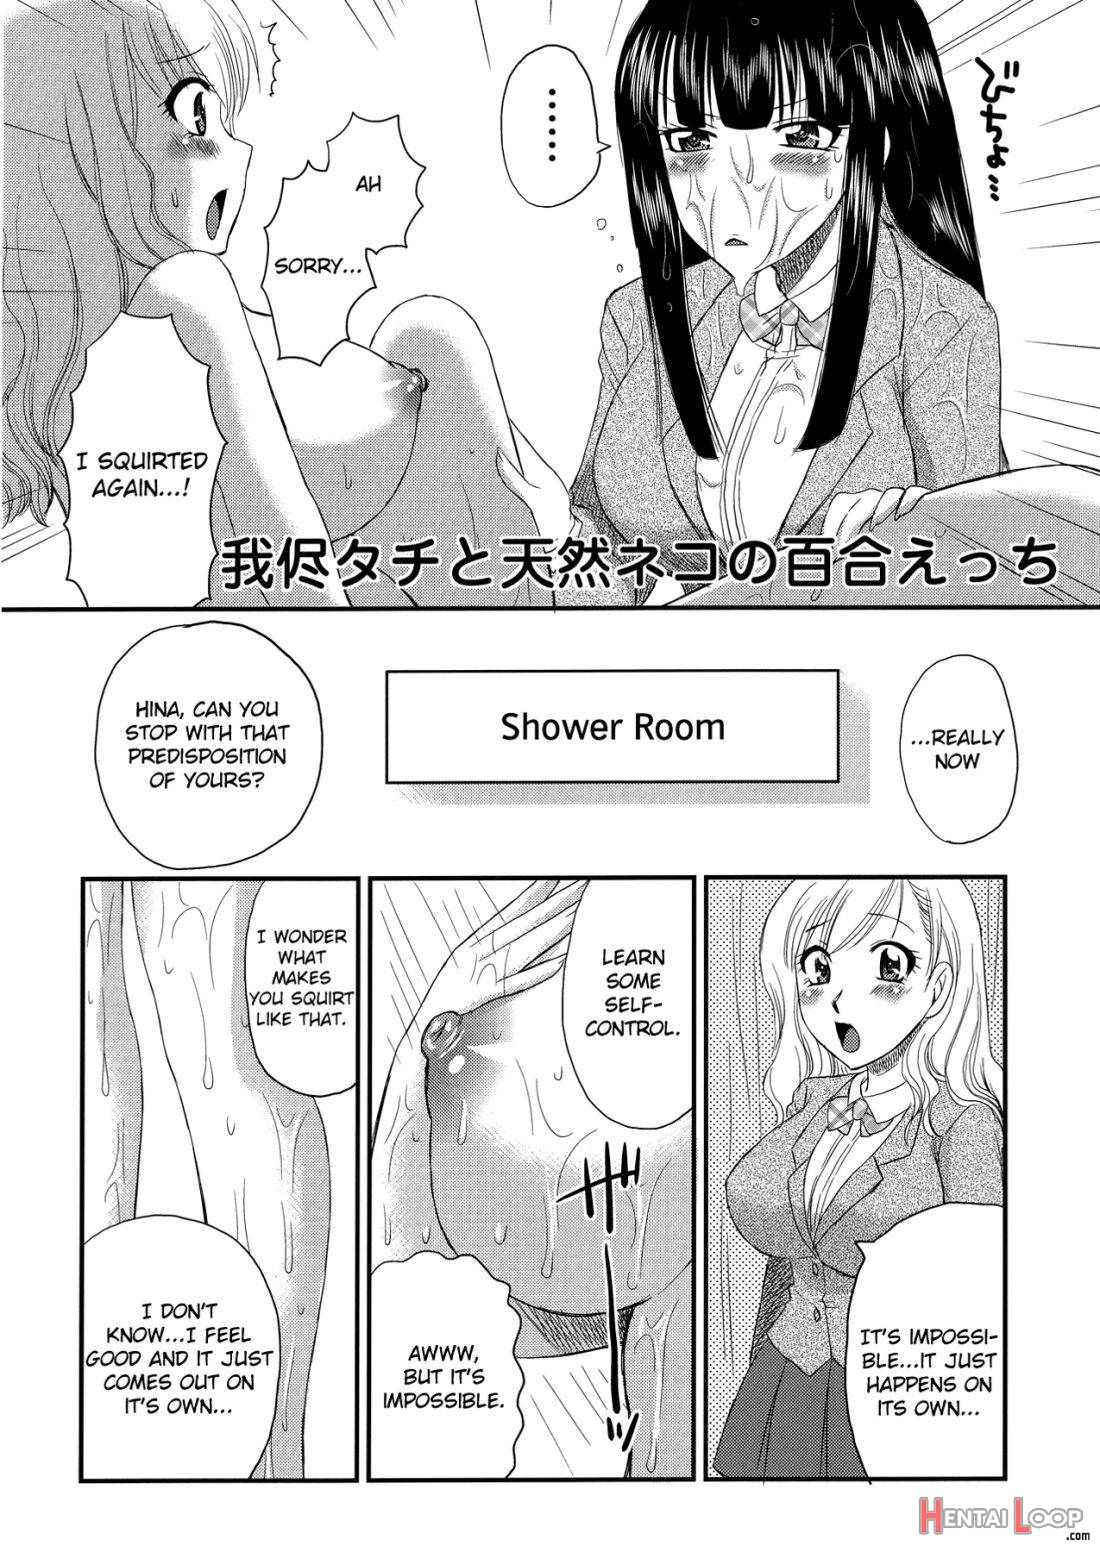 Selfish Top And Airheaded Bottom's Yuri Smut 2 page 3